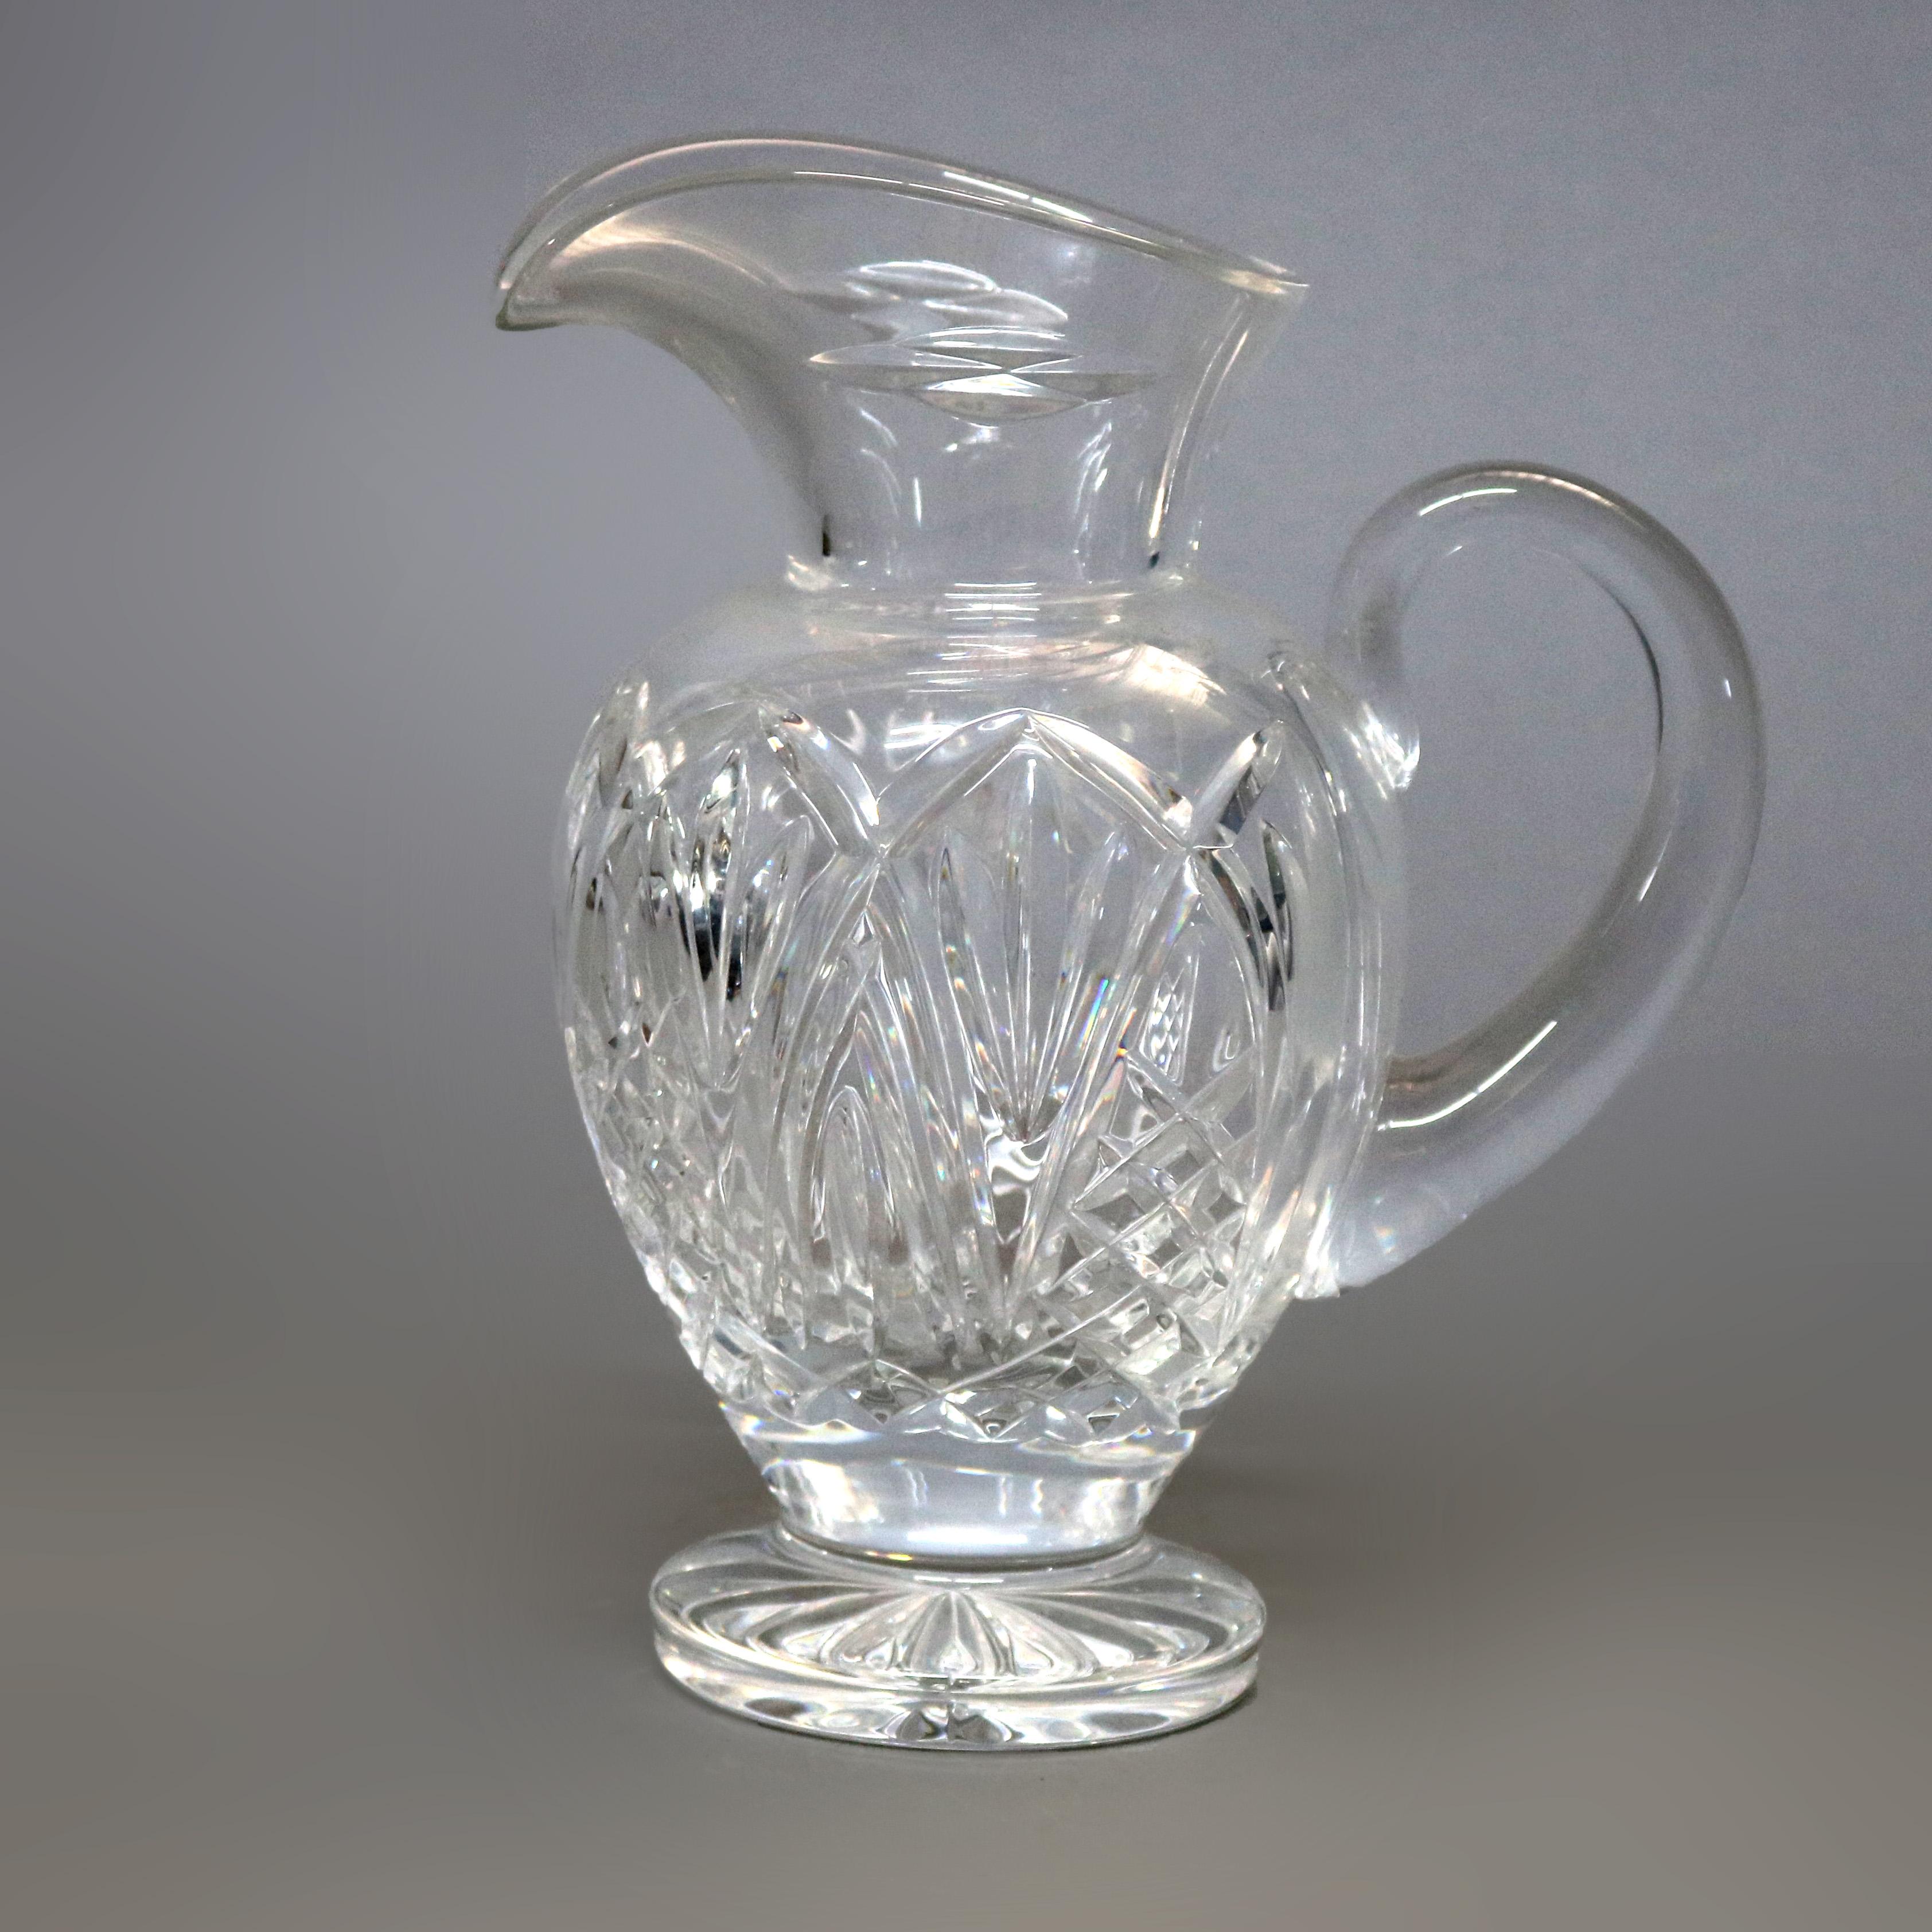 A vintage Waterford Crystal Bunratty Pitcher from the Romance of Ireland Collection offers exaggerated spout over cut crystal bulboul vessel raised on pedestal foot, acid etched Waterford mark on base, 38 oz, 20th cenury

Measures - 9.25